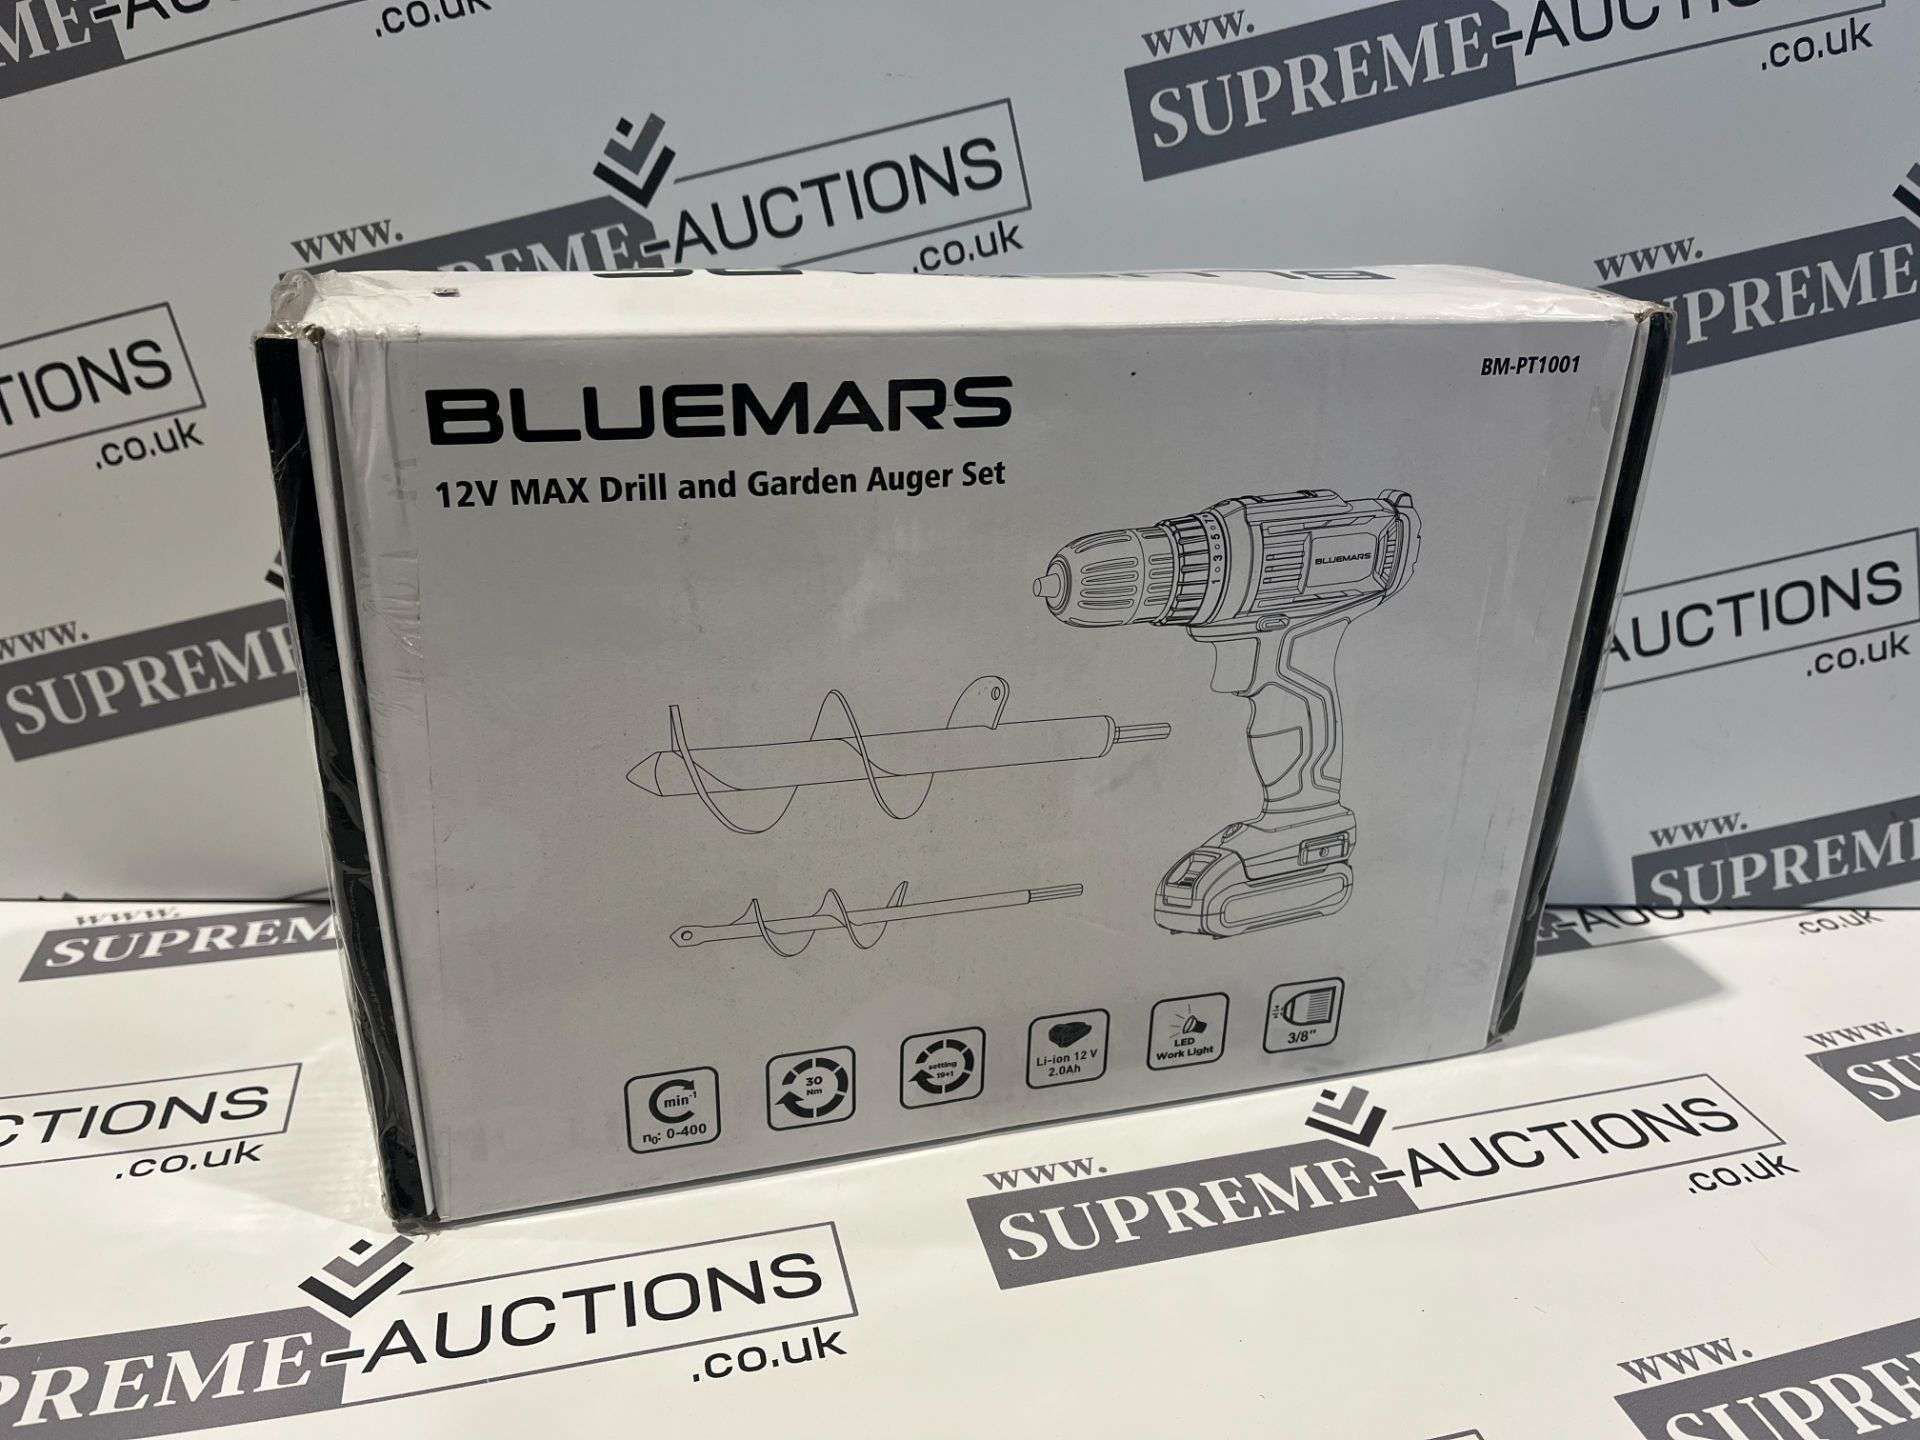 3x NEW & BOXED BLUEMARS 12V MAX DRILL AND GARDEN AUGER SETS. (S1RA)